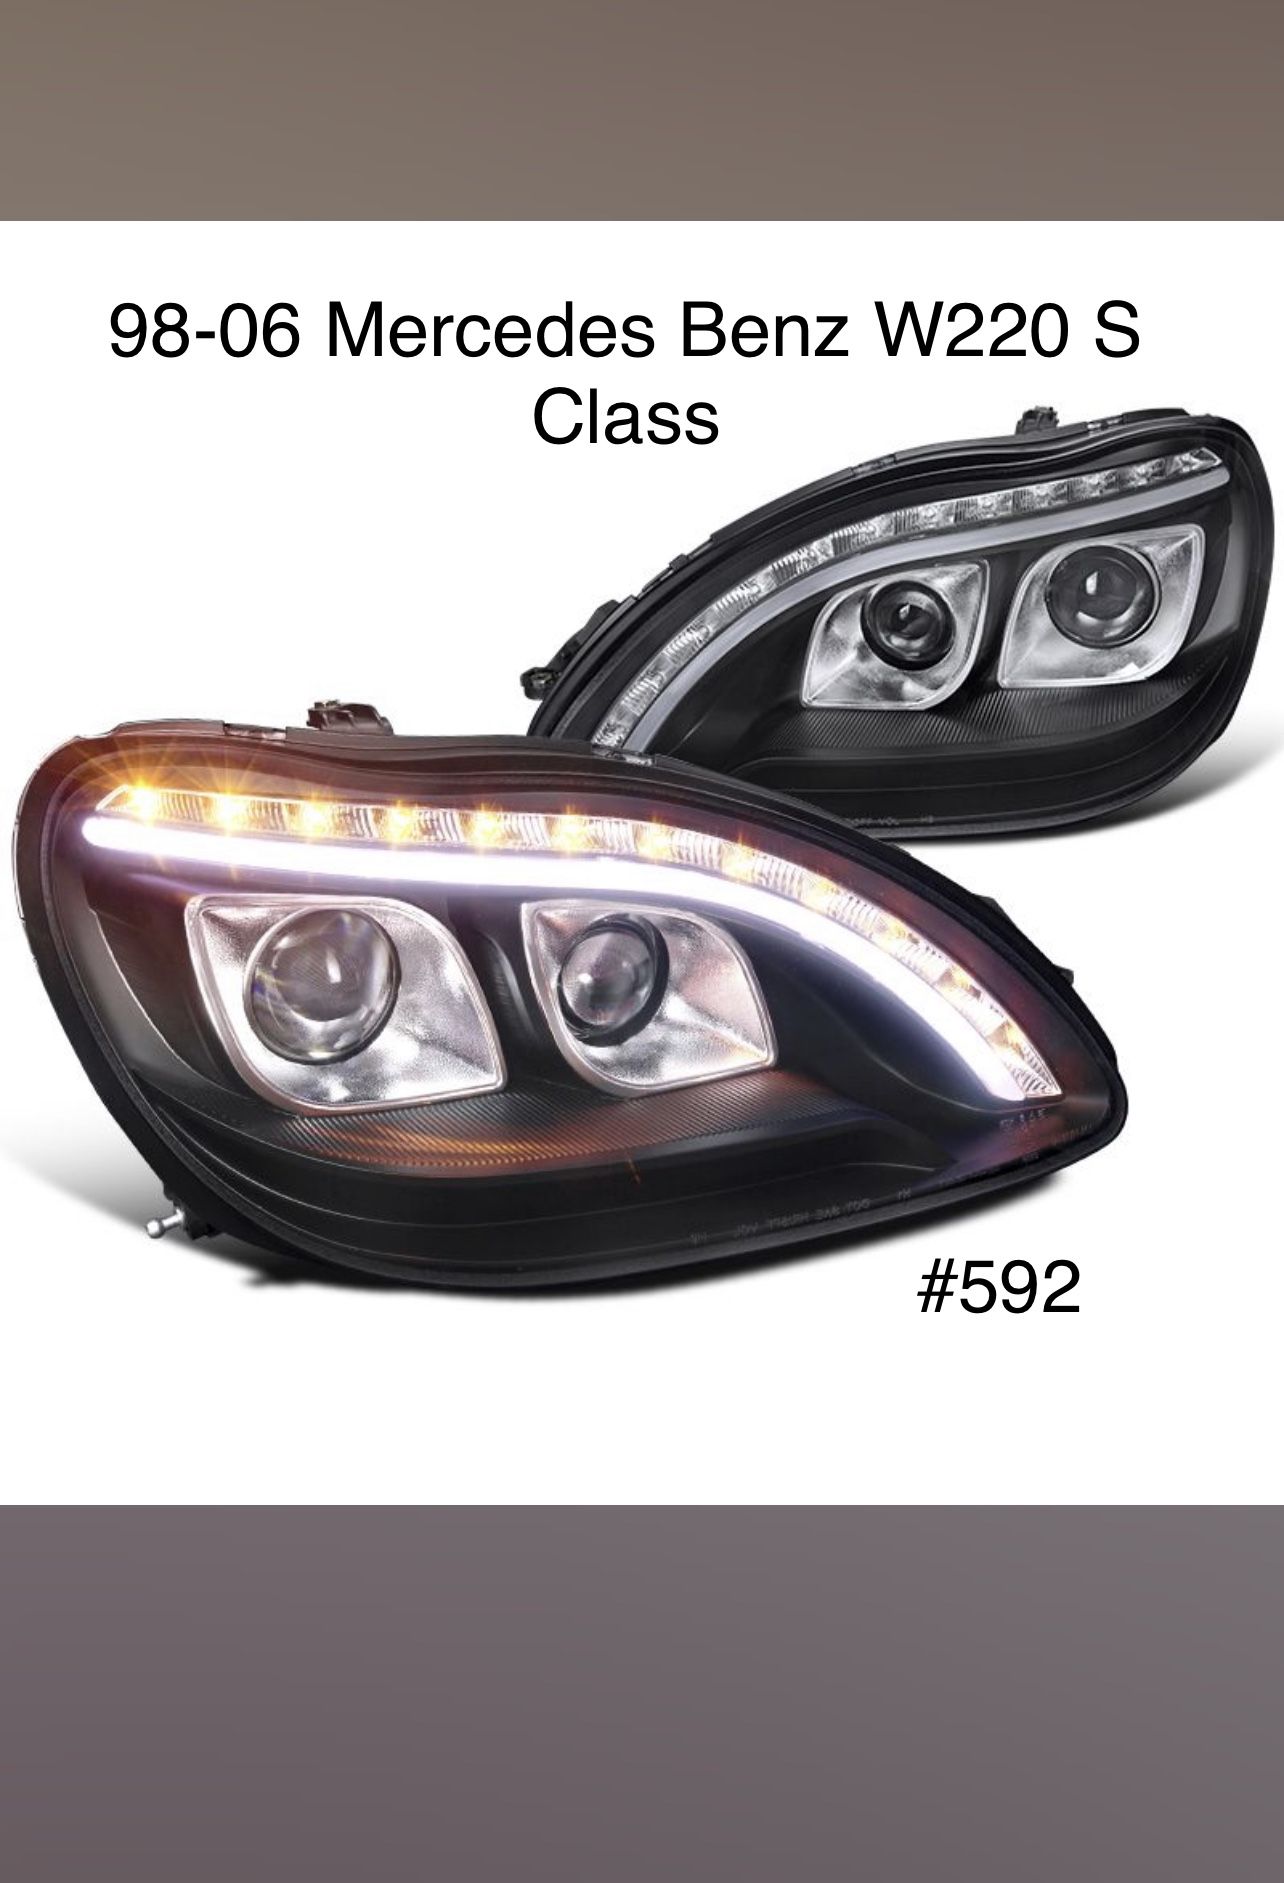 1998 TO 2006 MERCEDES BENZ W220 S CLASS HALOGEN MODEL DRL HEADLIGHTS (FOR THE PAIR)